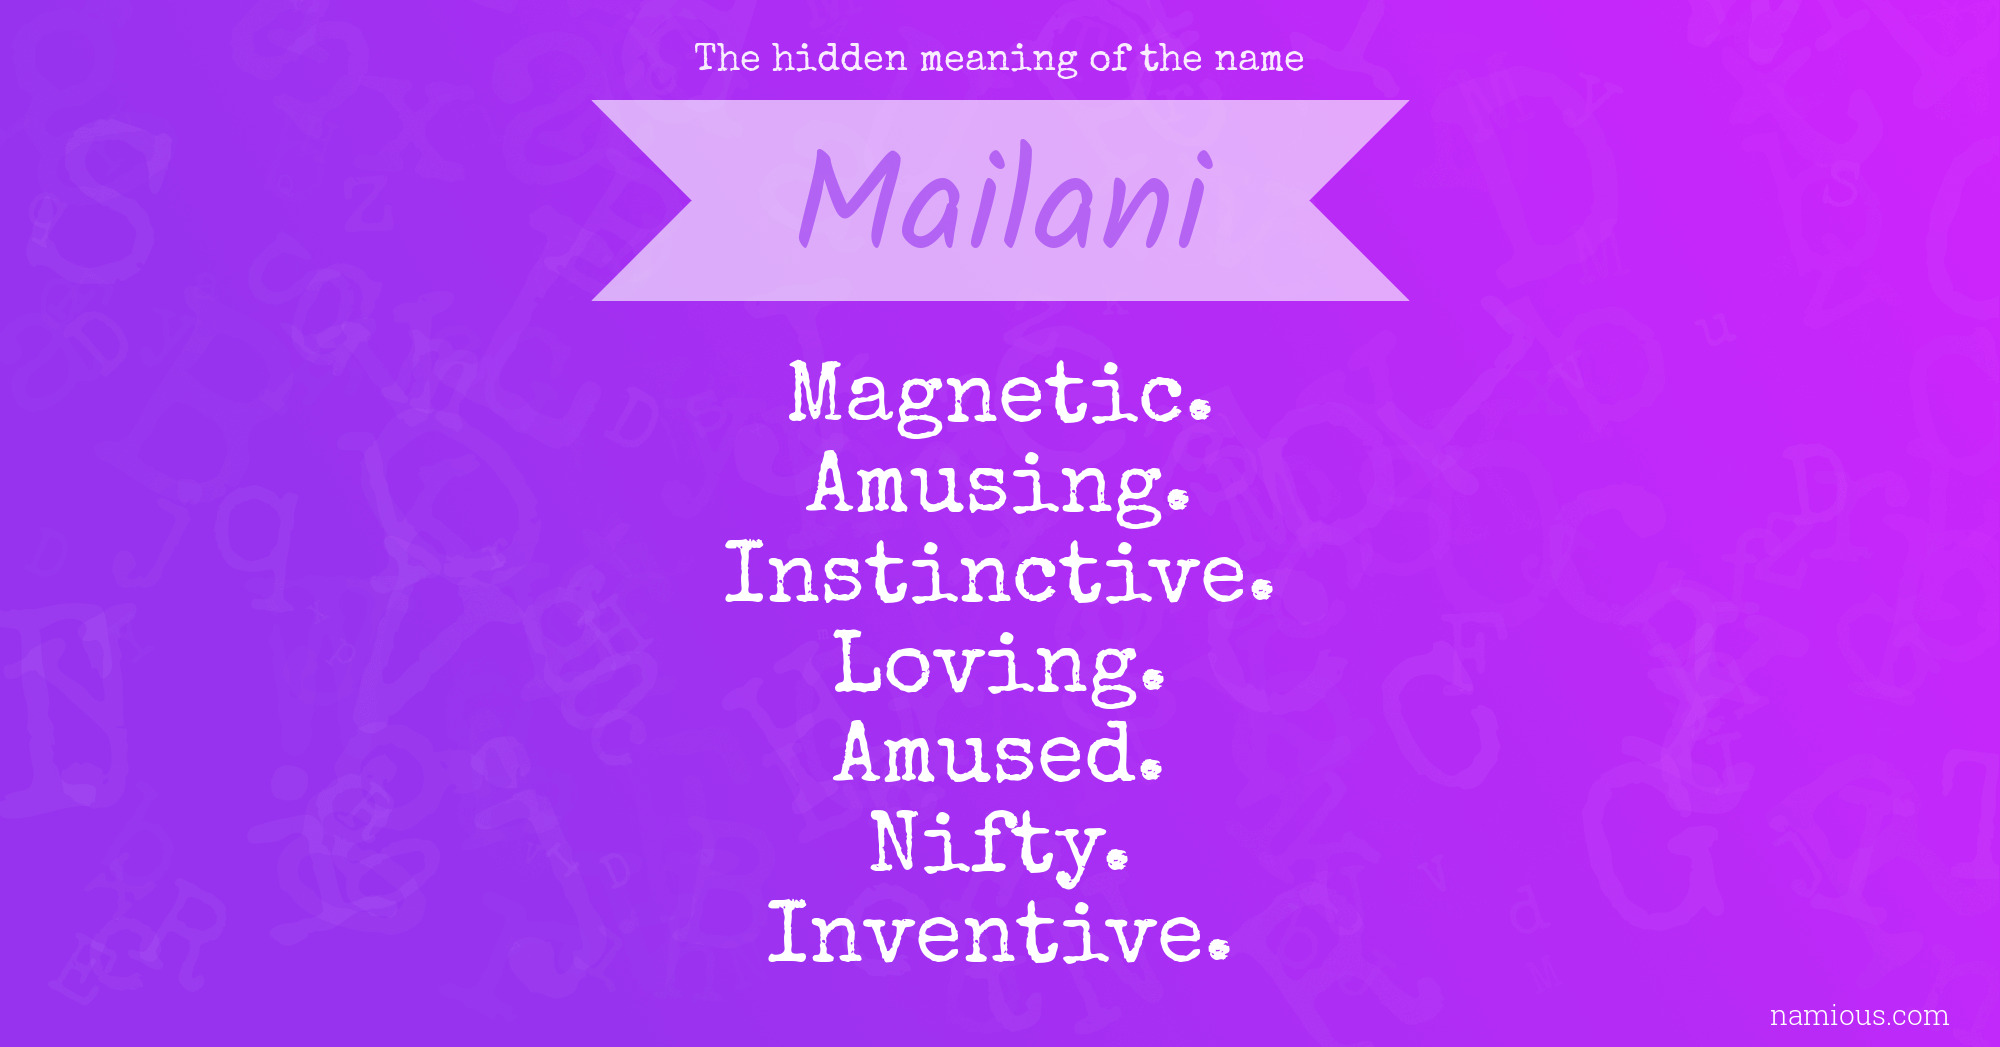 The hidden meaning of the name Mailani